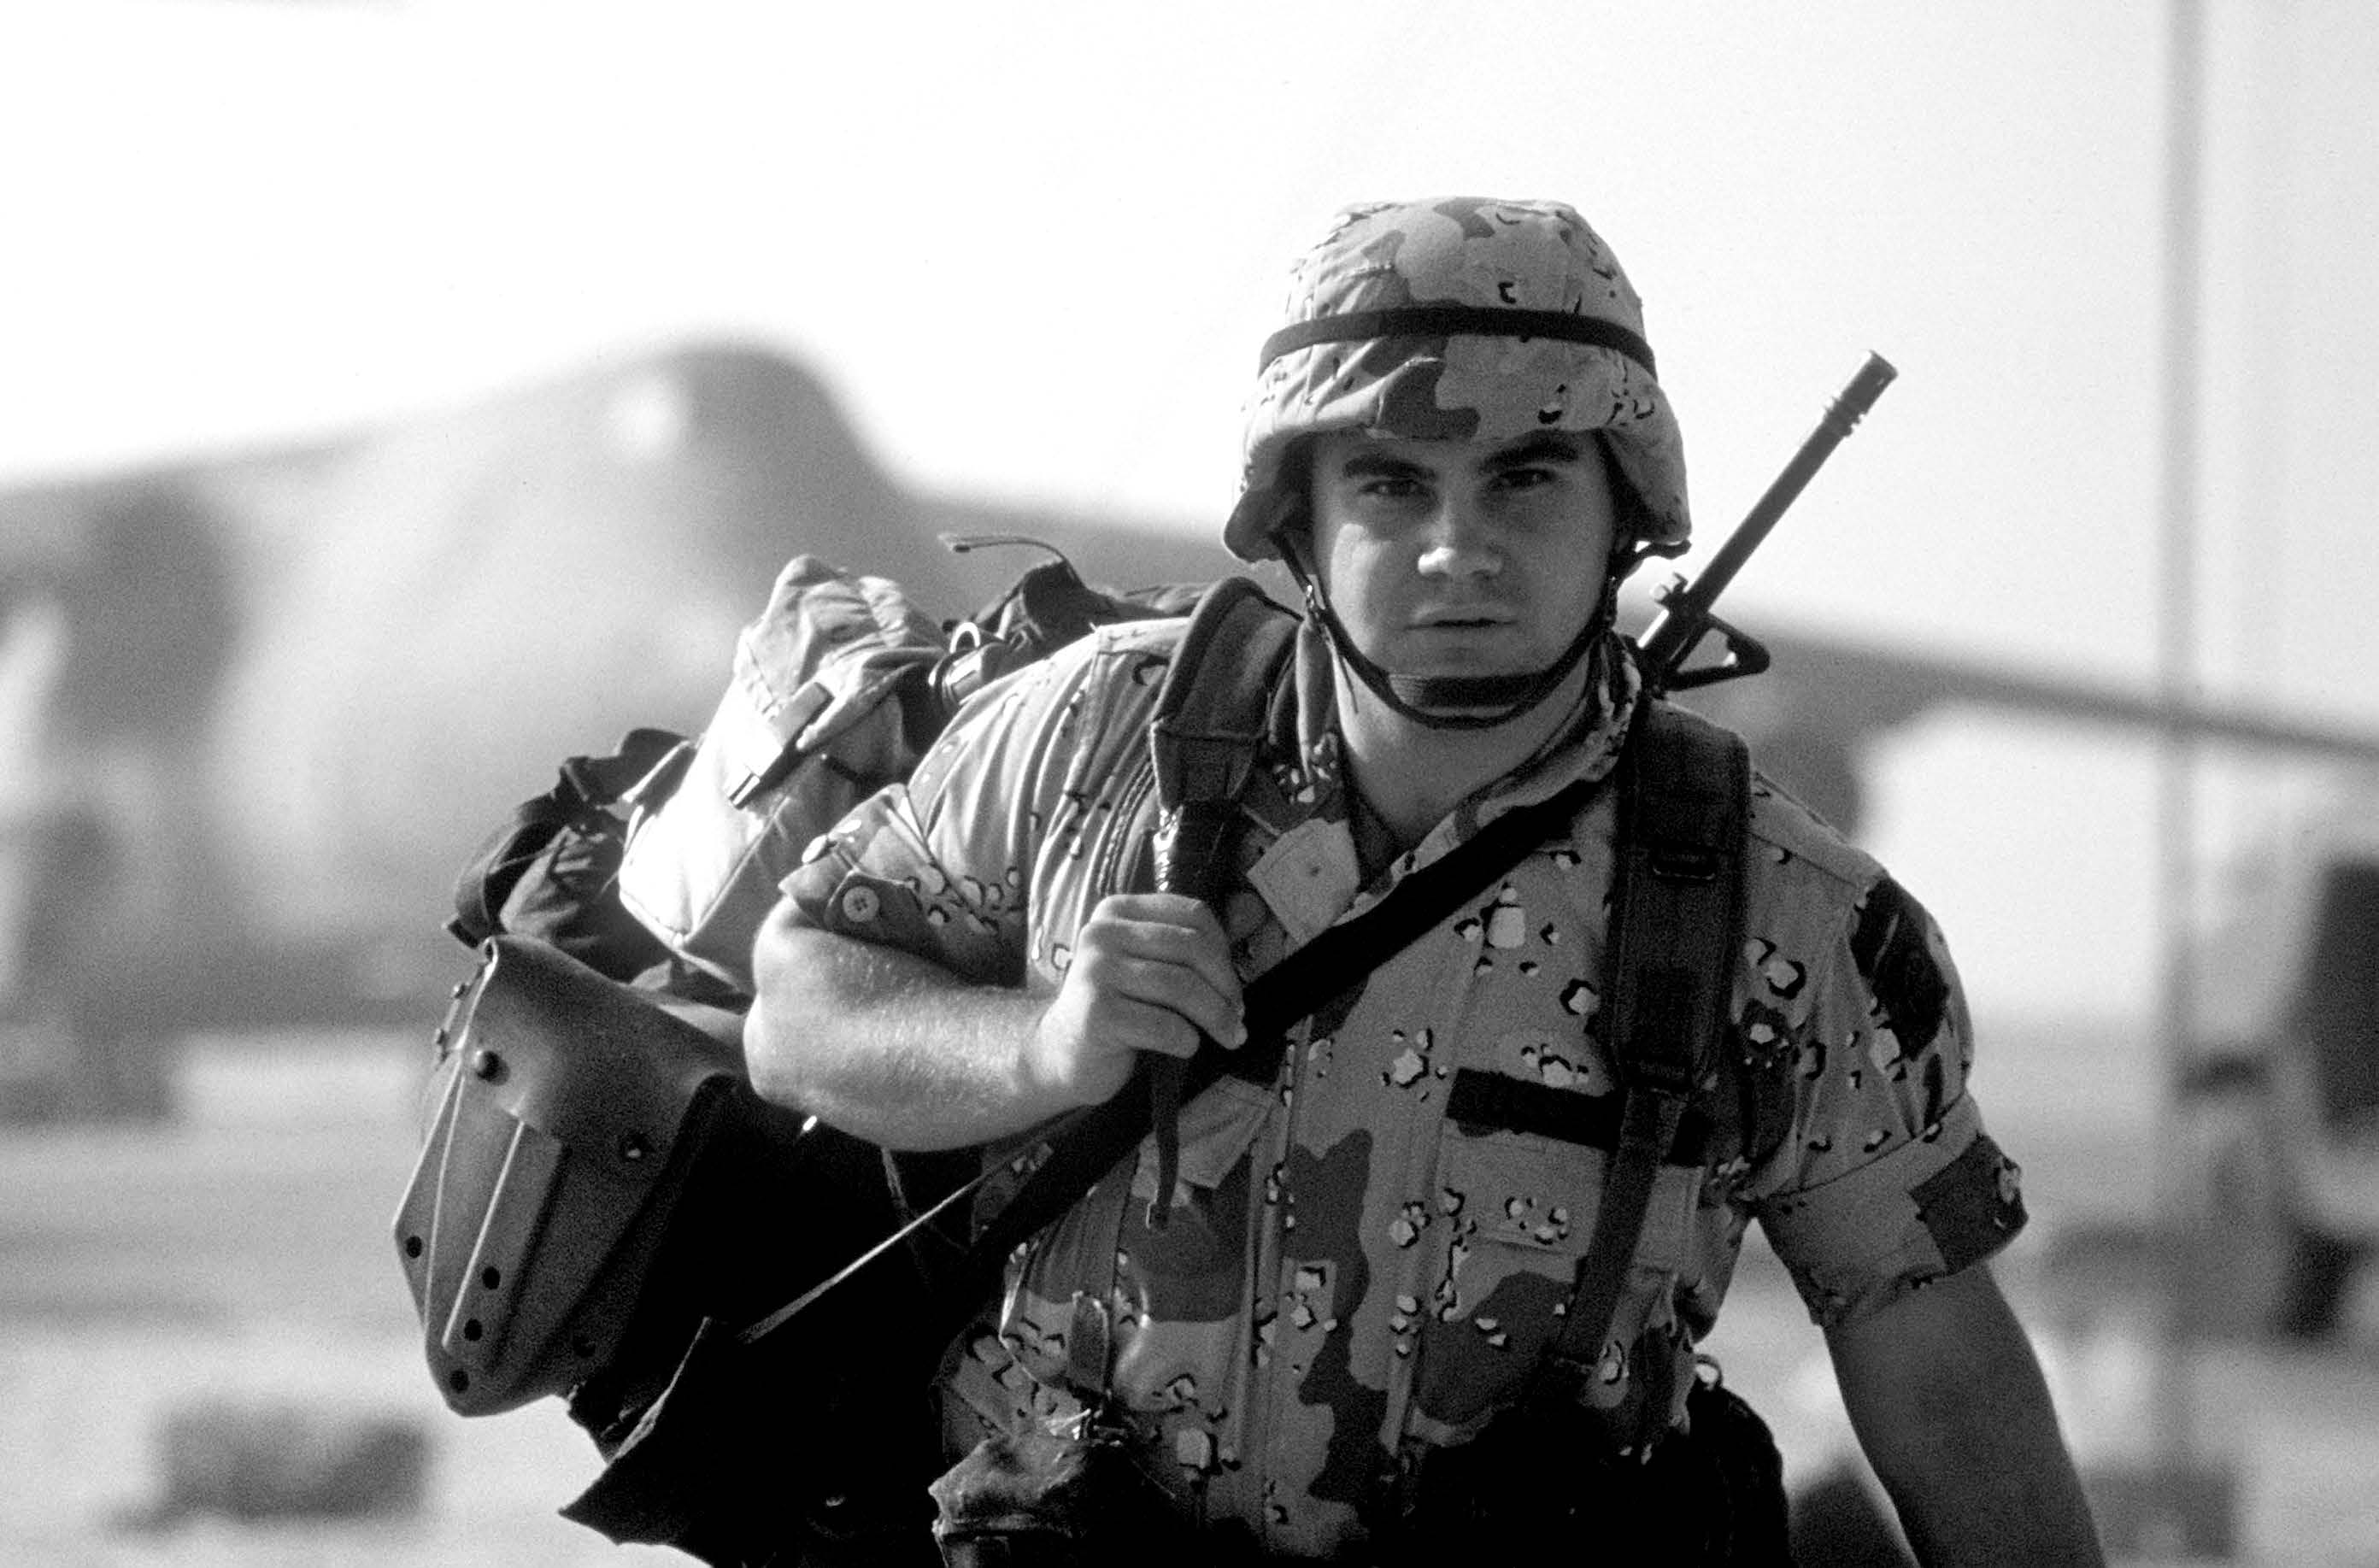 A soldier carries his gear after arriving in Saudi Arabia during Operation Desert Shield. Courtesy of DoD.